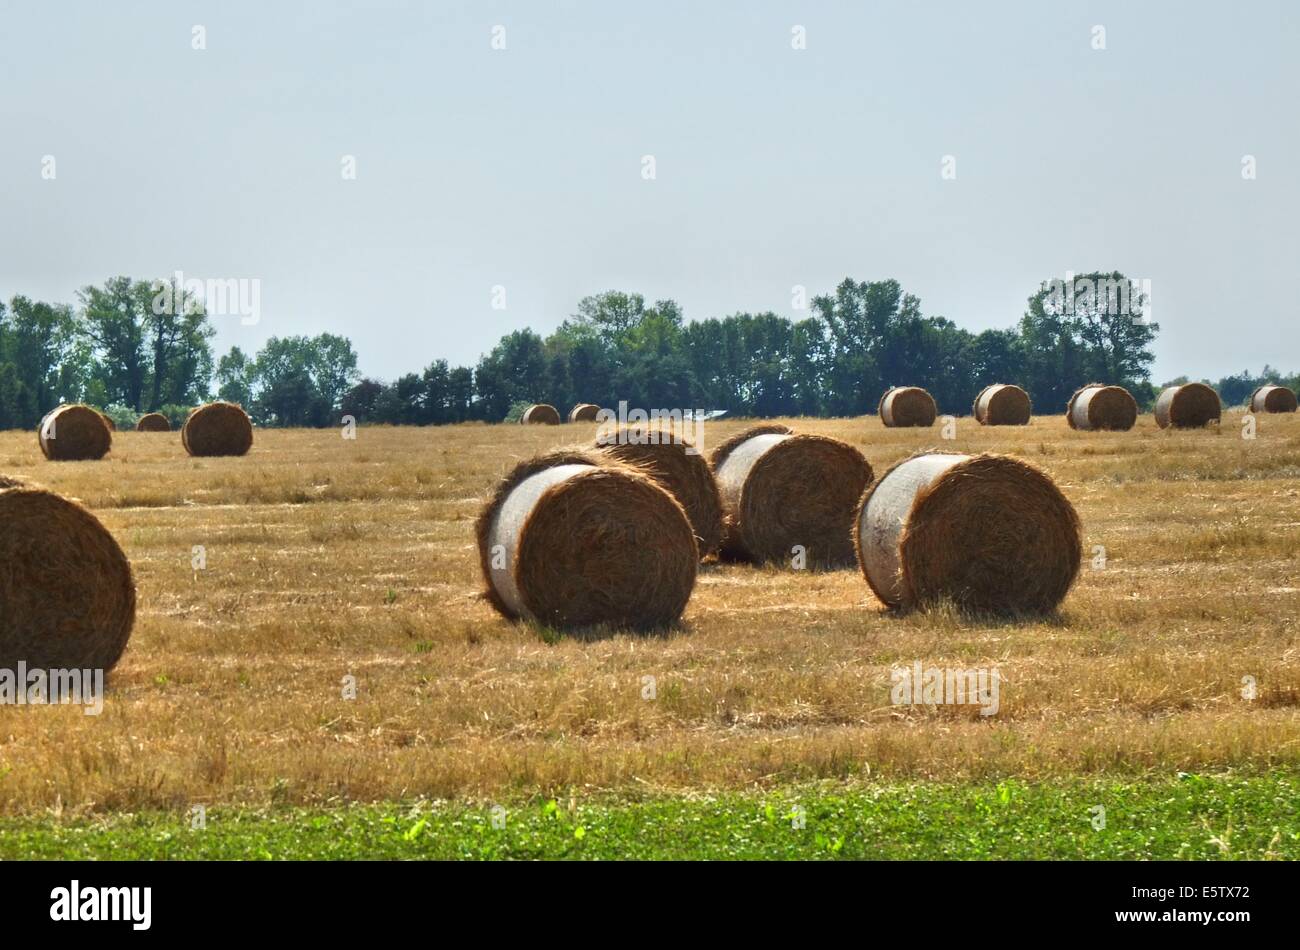 Denmark, Bornholm Island 1st - 4th, August 2014 Farmers during the harvesting process on the Bornholm Island. Agriculture is one of a major sector of the economy of the Bornholm Island. Stock Photo